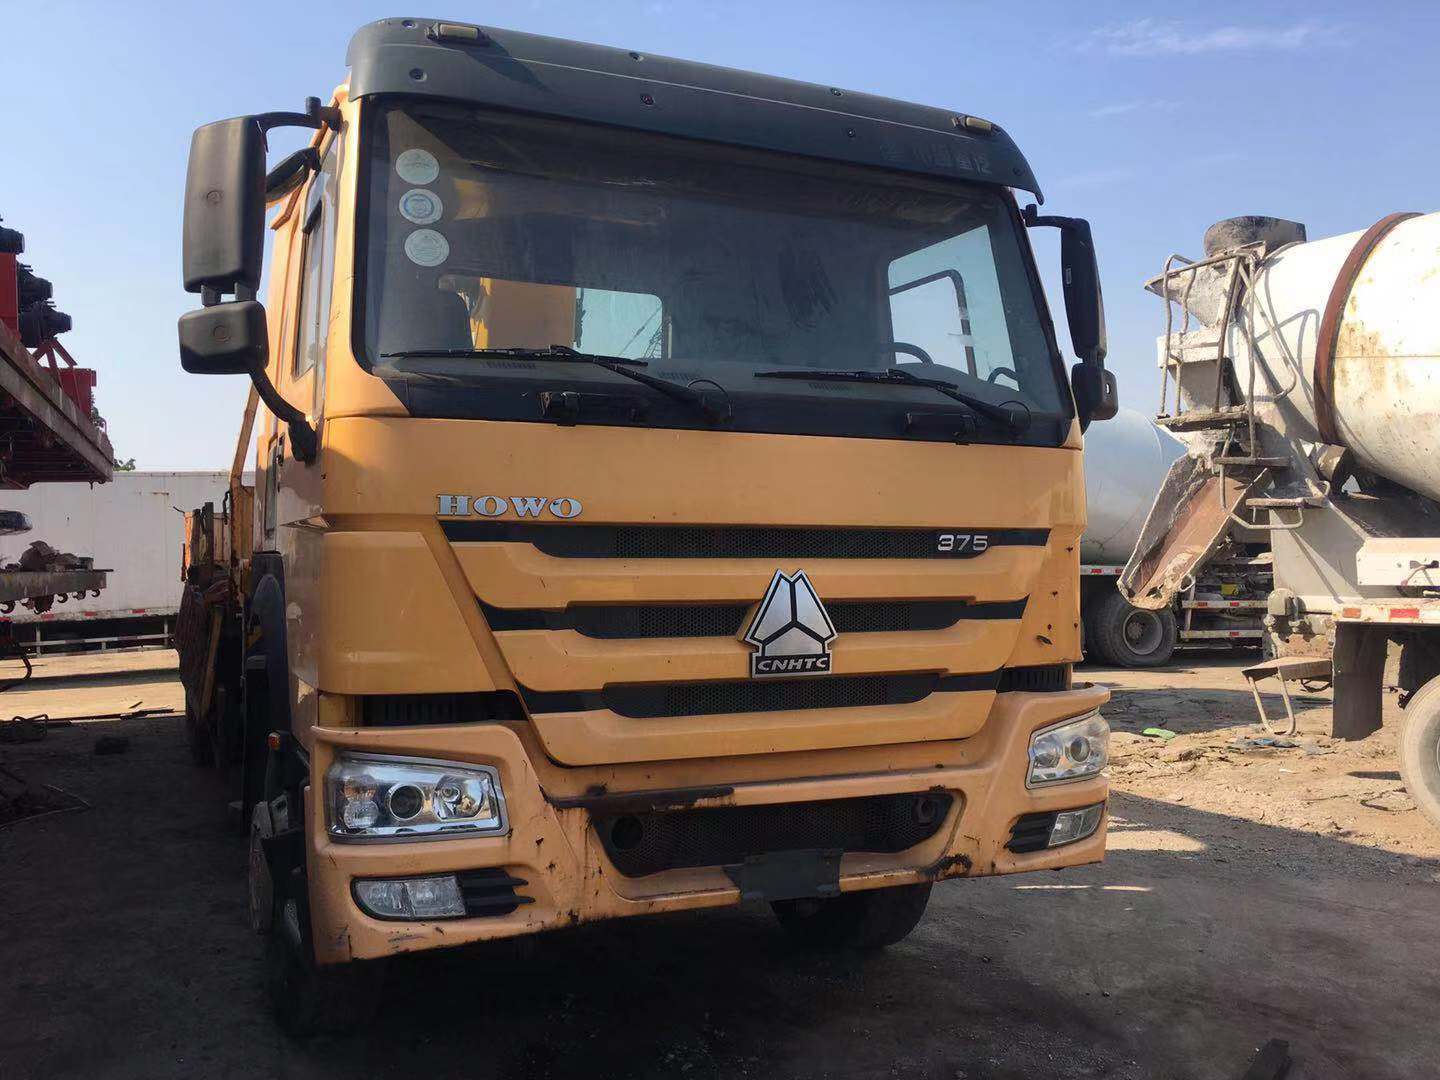 Used 8t Dump Truck with a Crane in High Quality with Low Price